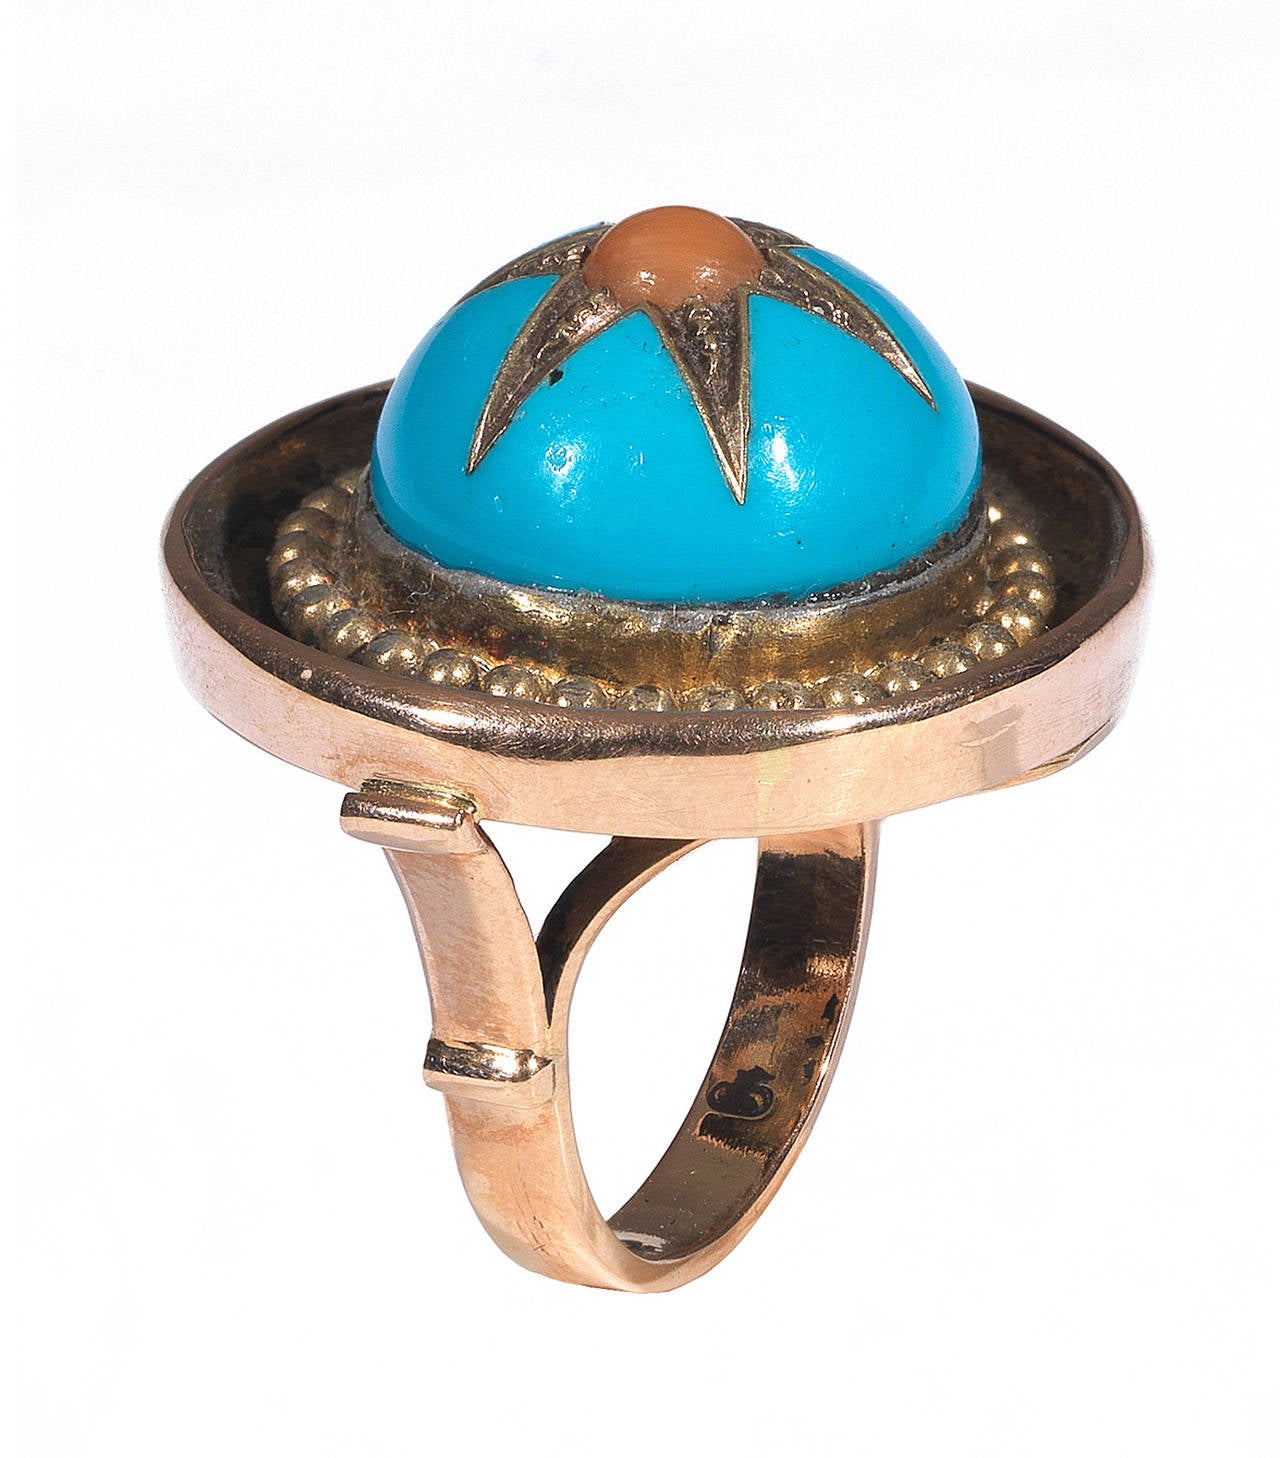 

Designed around central boss, decorated with light blue enamel centered by a star with a cabochon coral.

Weight: 11 gr

Size: 6.5